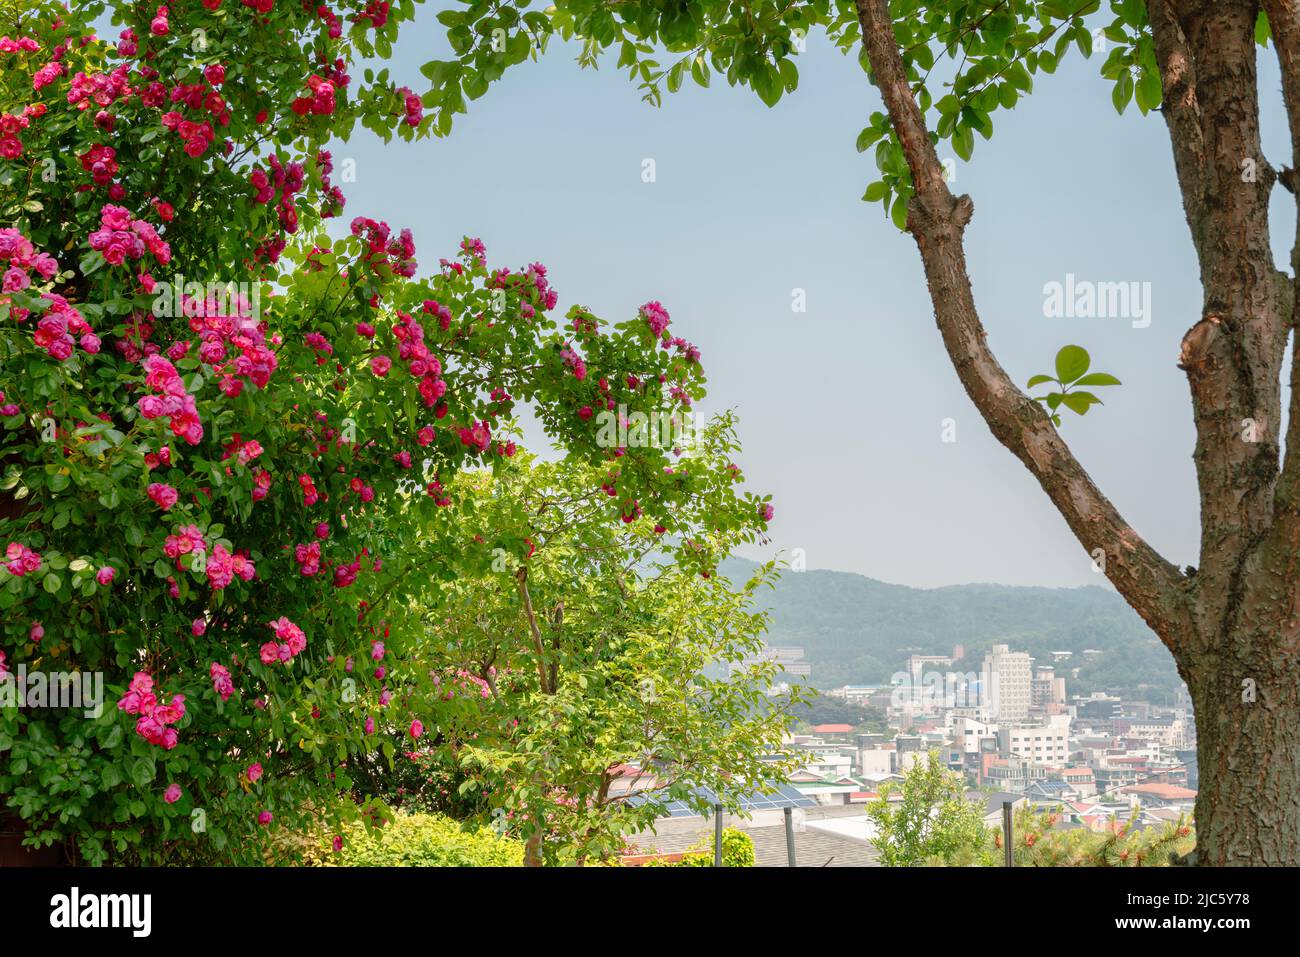 Gung-dong Neighborhood Park and Yeonhui-dong city view at spring in Seoul, Korea Stock Photo